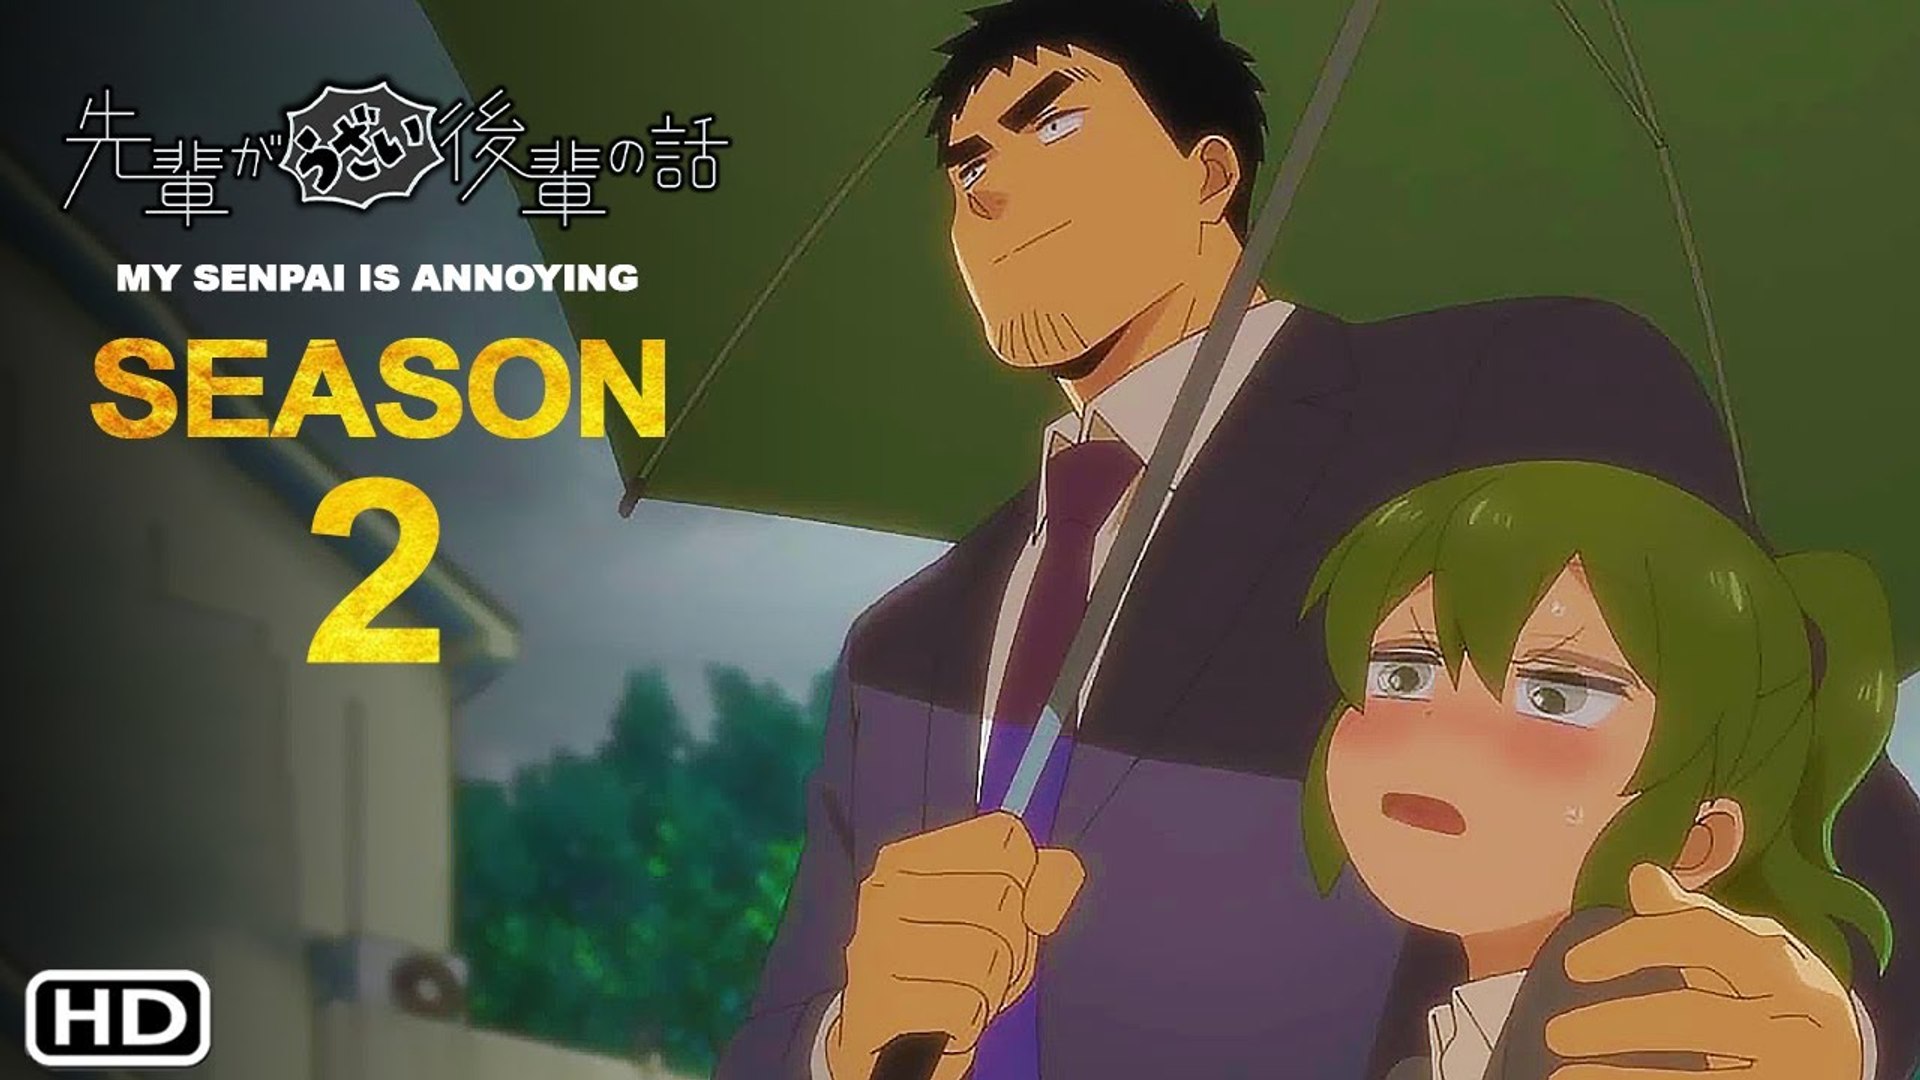 My Senpai is Annoying Season 2: Release Date and Plot Details